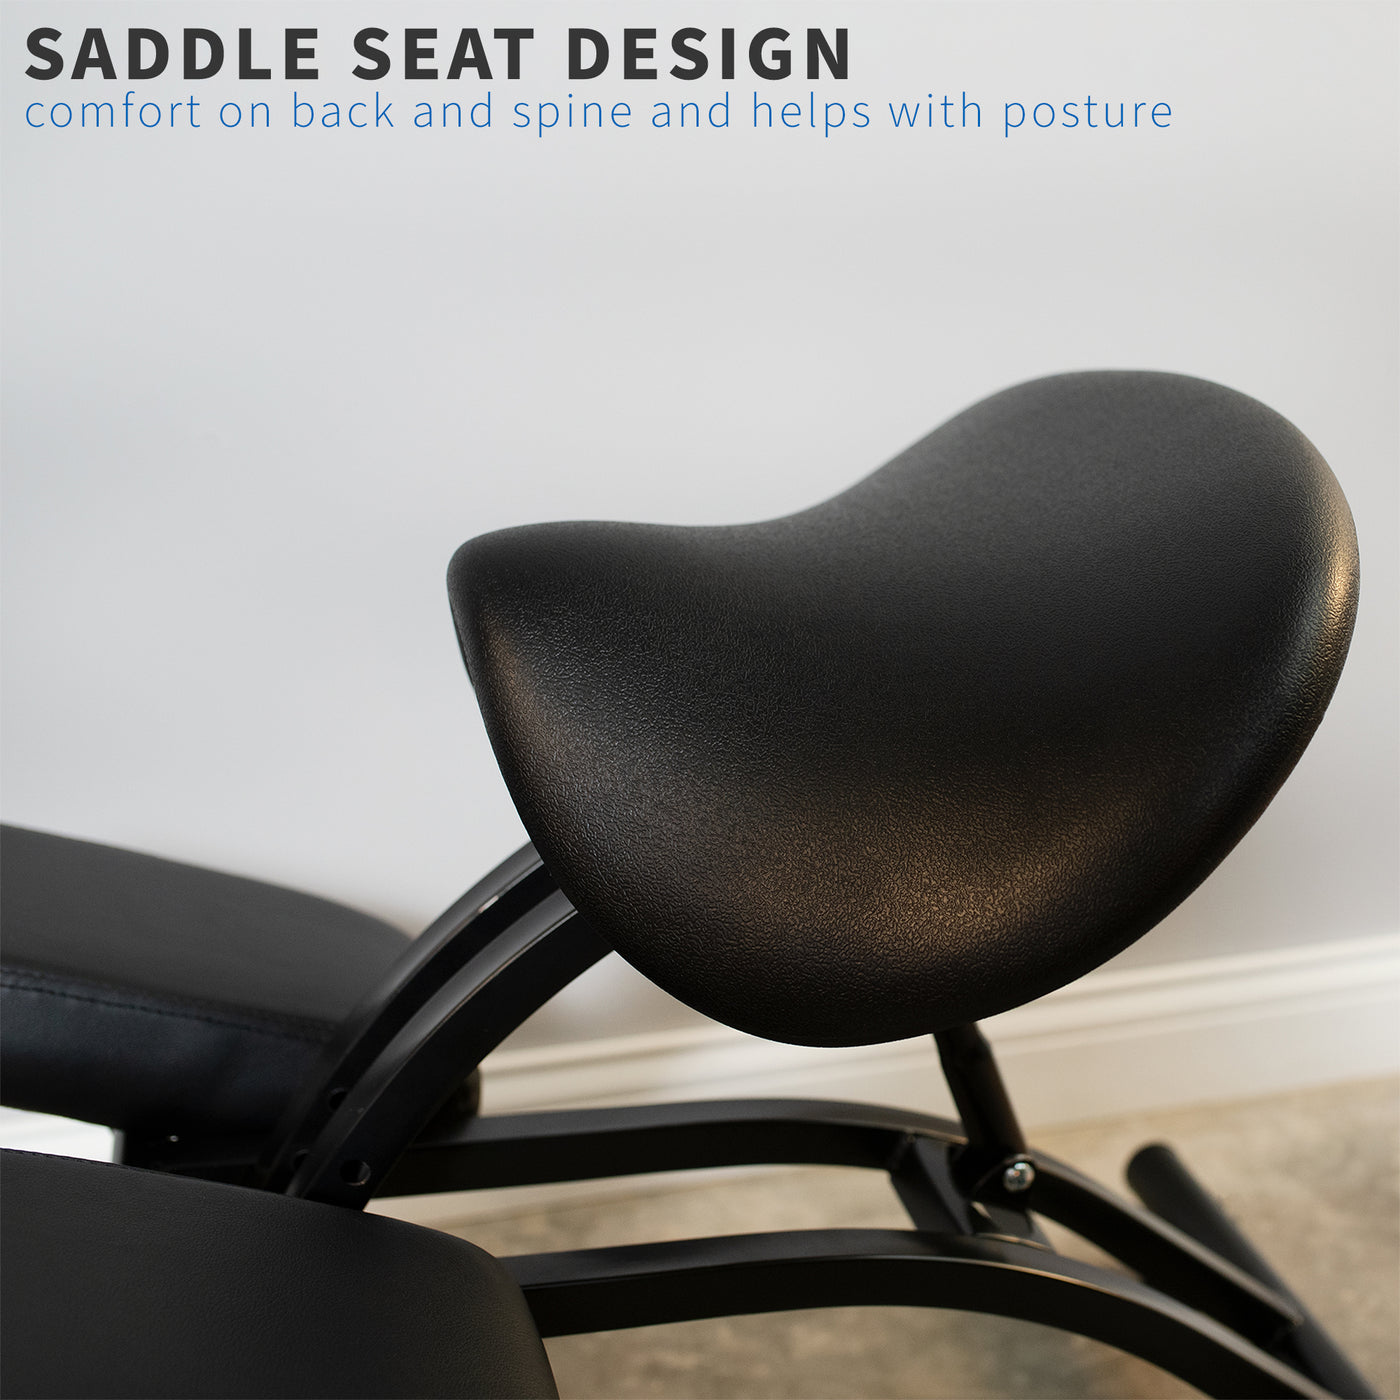 Sturdy saddle seat kneeling chair for posture and back support.